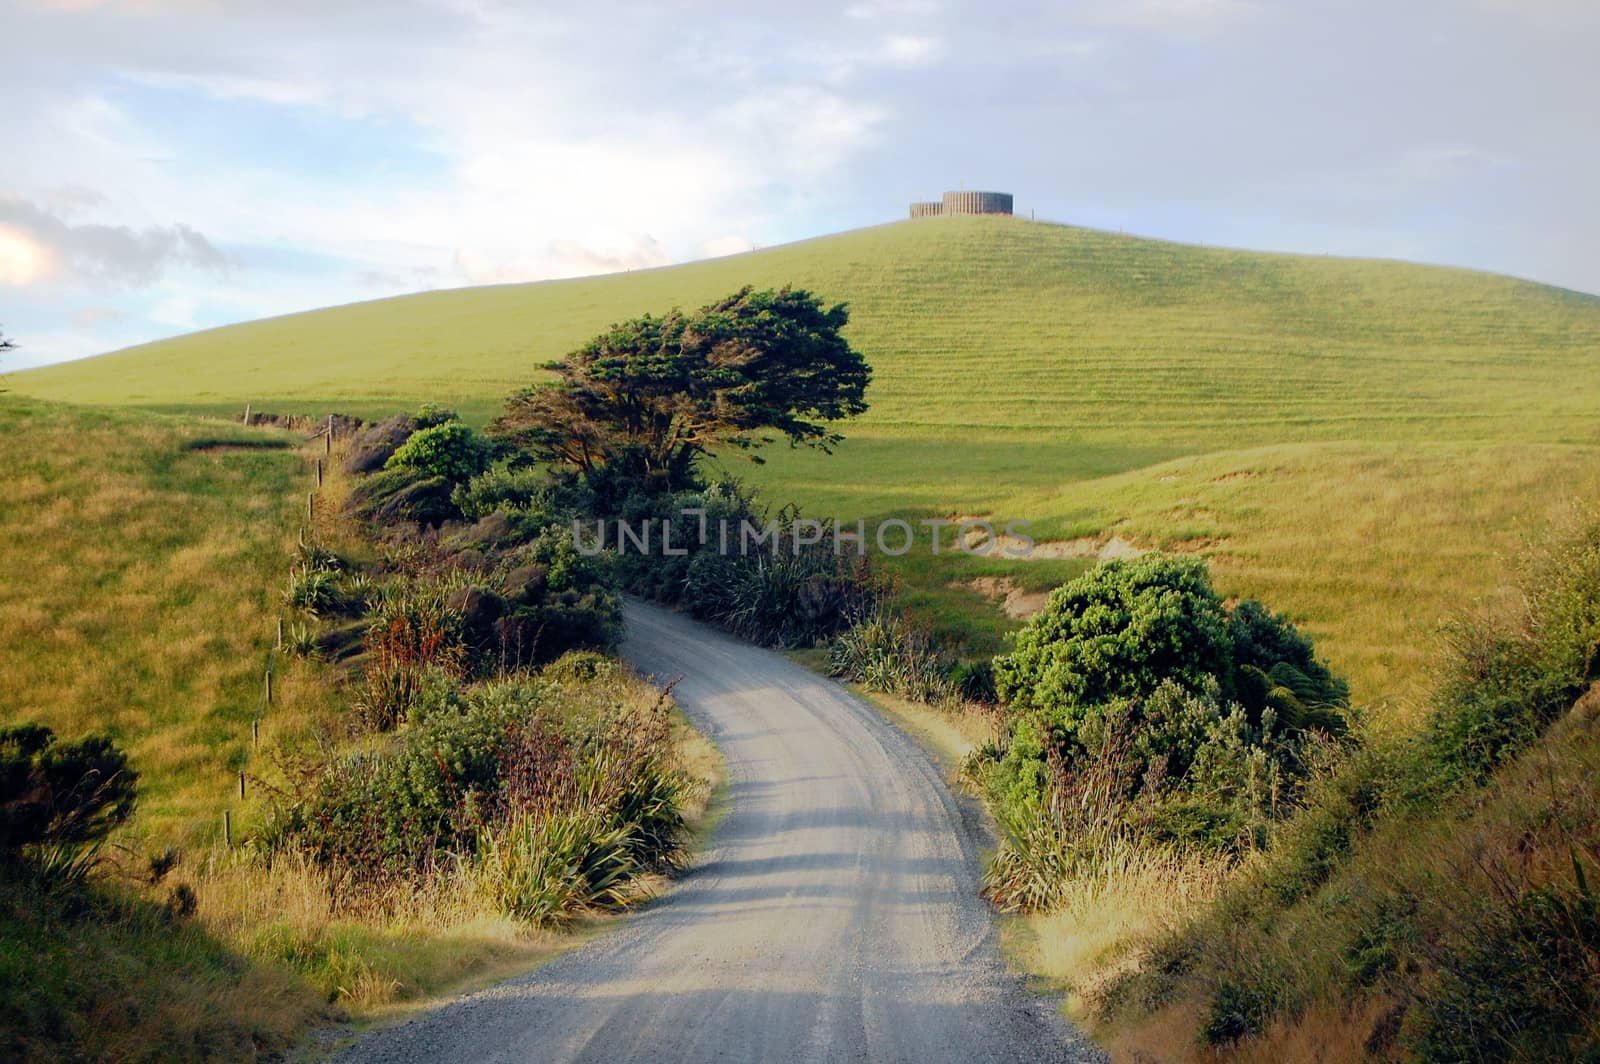 Gravel road turn left at rural area near water tank on hill top, Dargaville, New Zealand